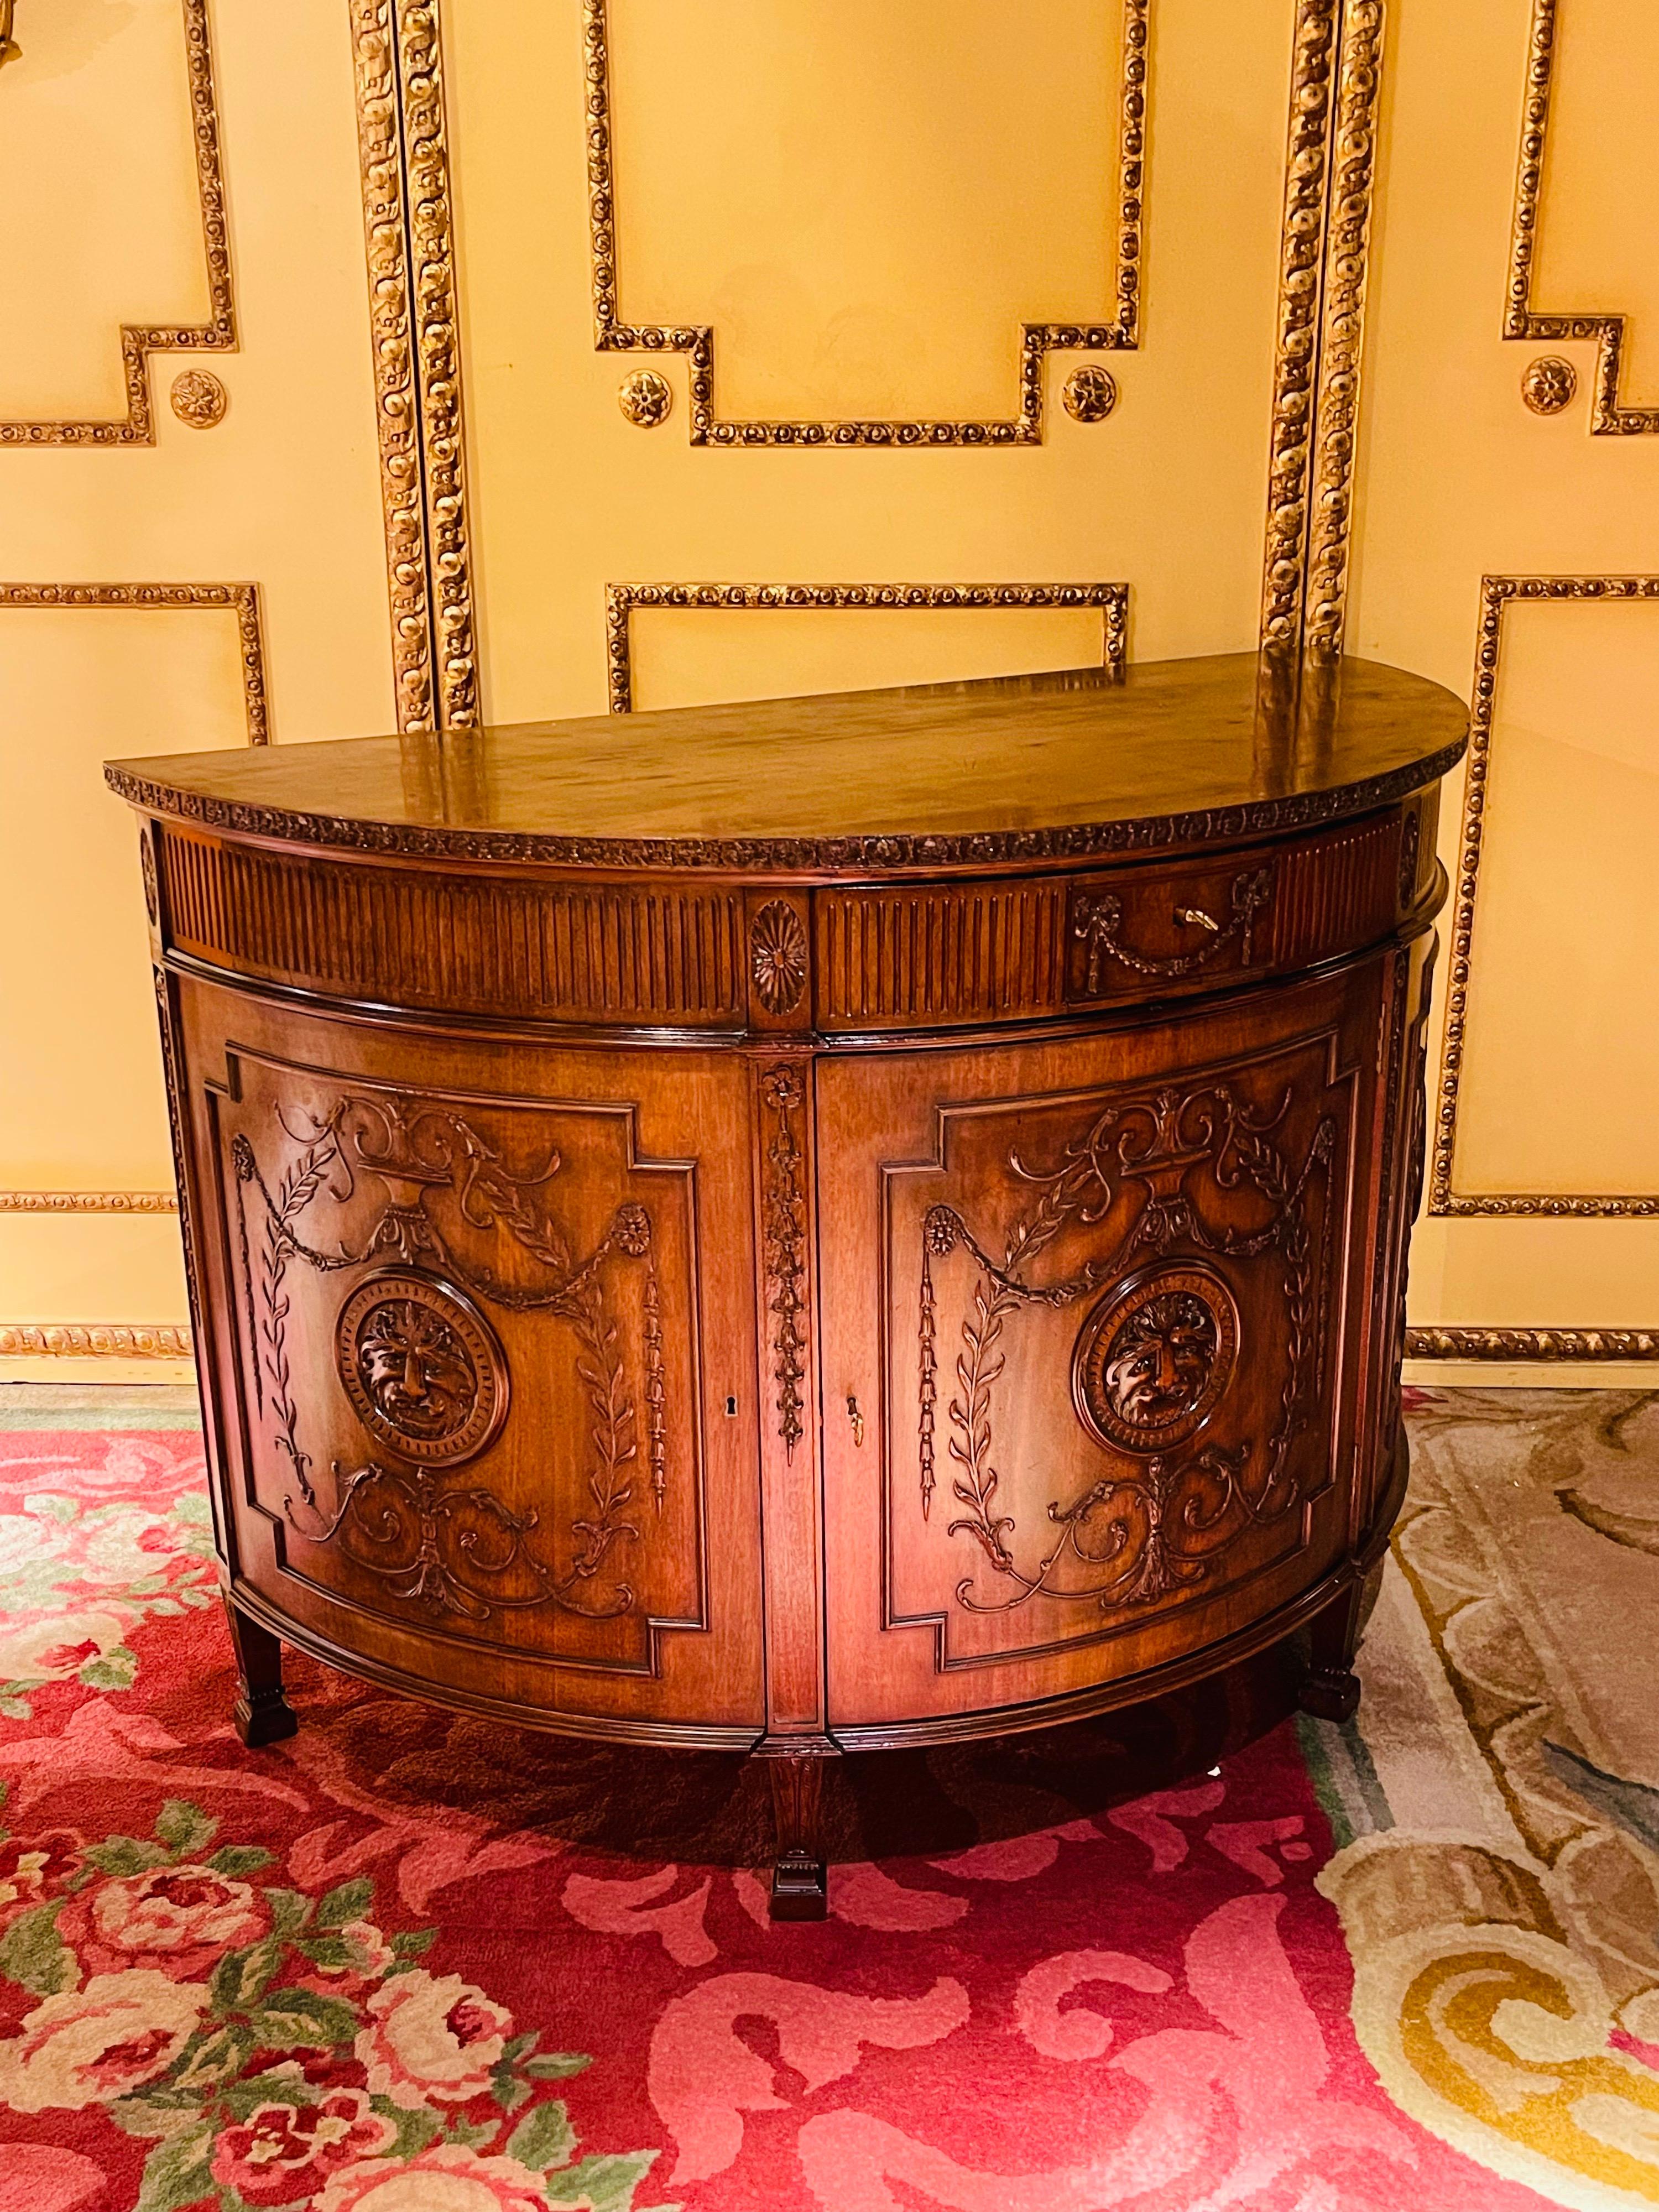 19th century Excellent semicircular wall chest of drawers. Neoclassicism

Semicircular solid wood body, finely carved. Extremely high quality workmanship. French neoclassicism around 1890.

The chest of drawers has 3 large double doors and a